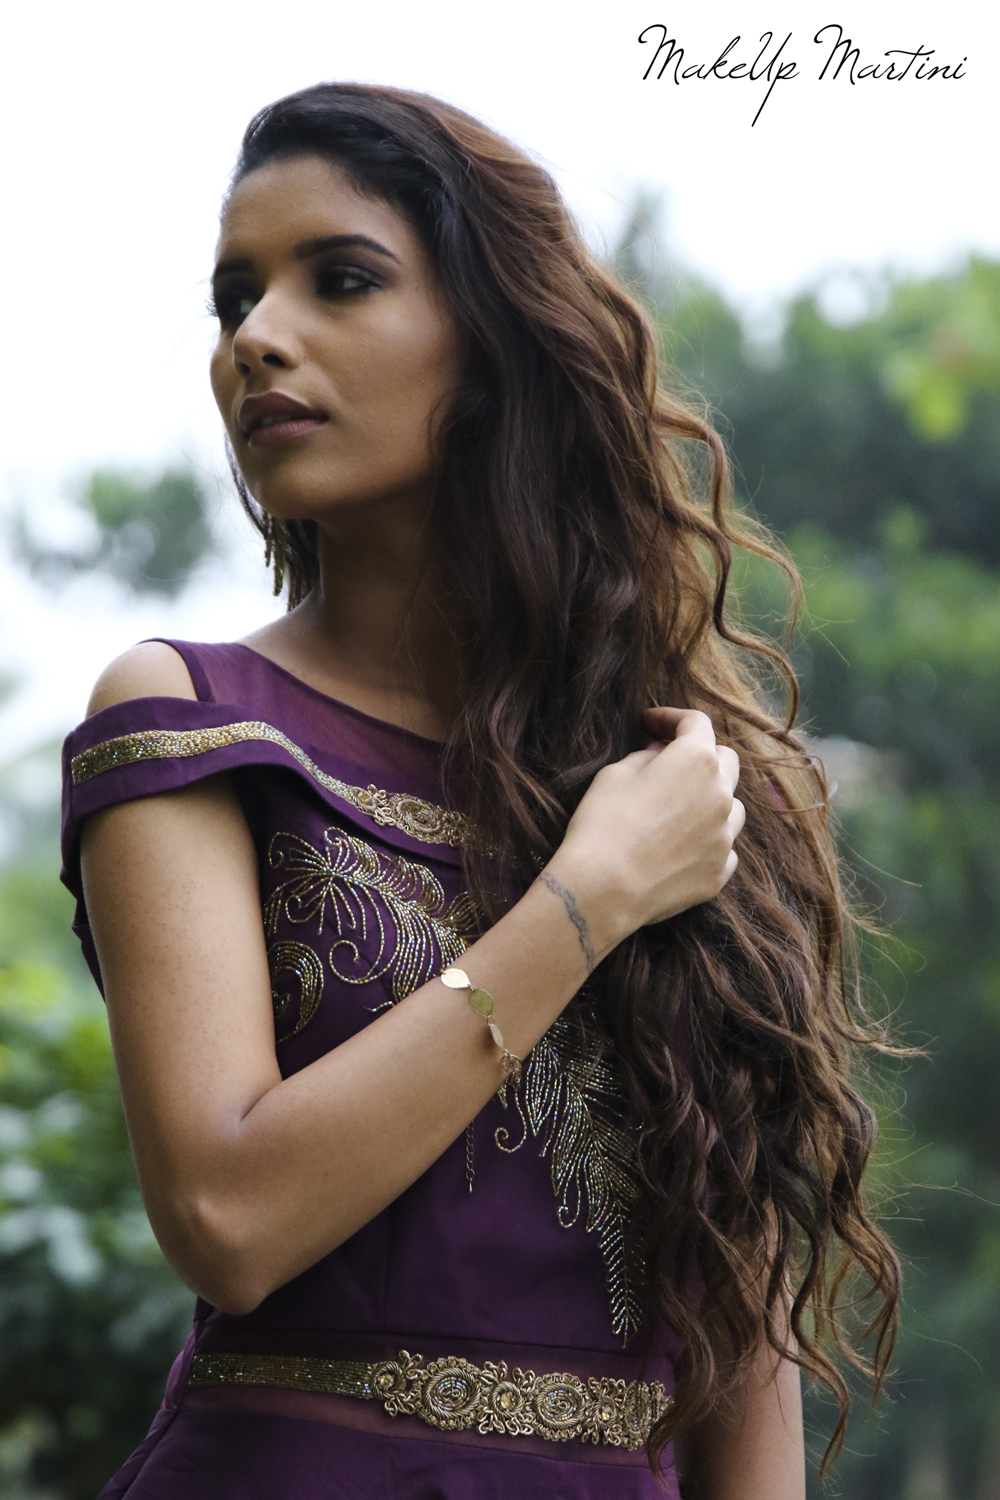 Hairstyles For Indo Western Outfits - Indian Beauty Tips